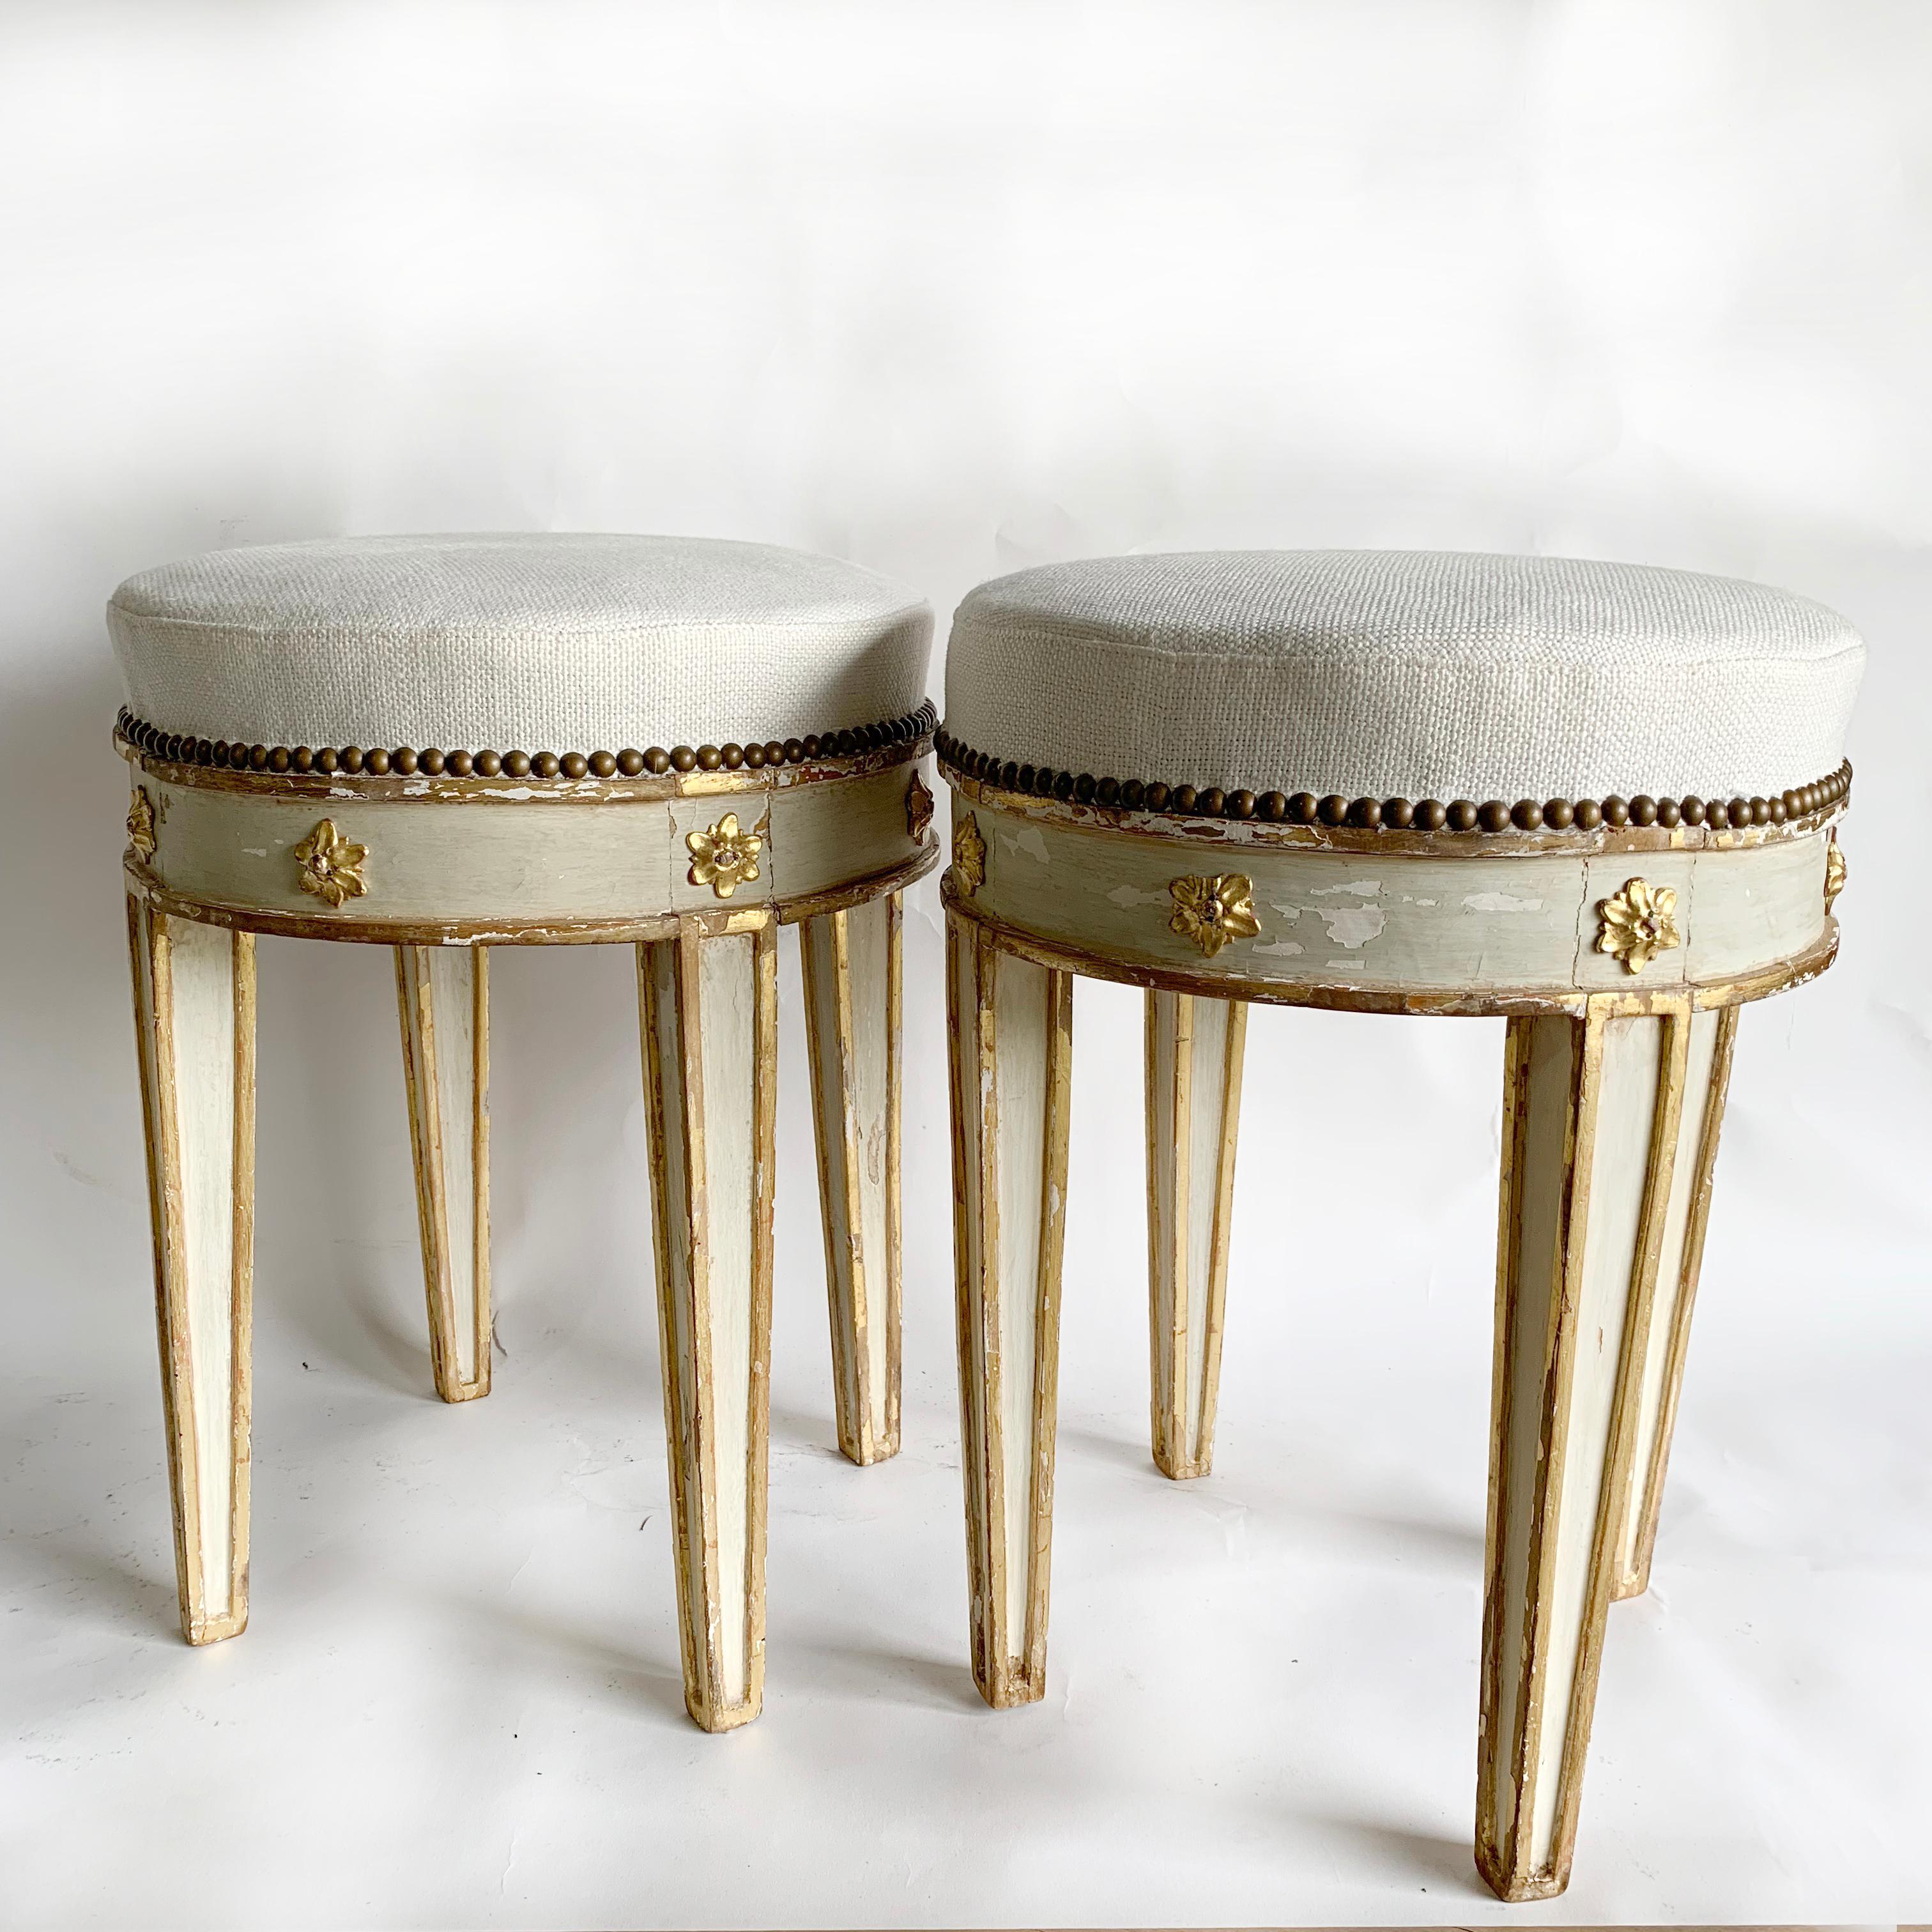 Beautiful 18th century pair of Swedish tabouret stools with rare gilt neoclassical carvings. New upholstery in a heavyweight white Belgian Linen.